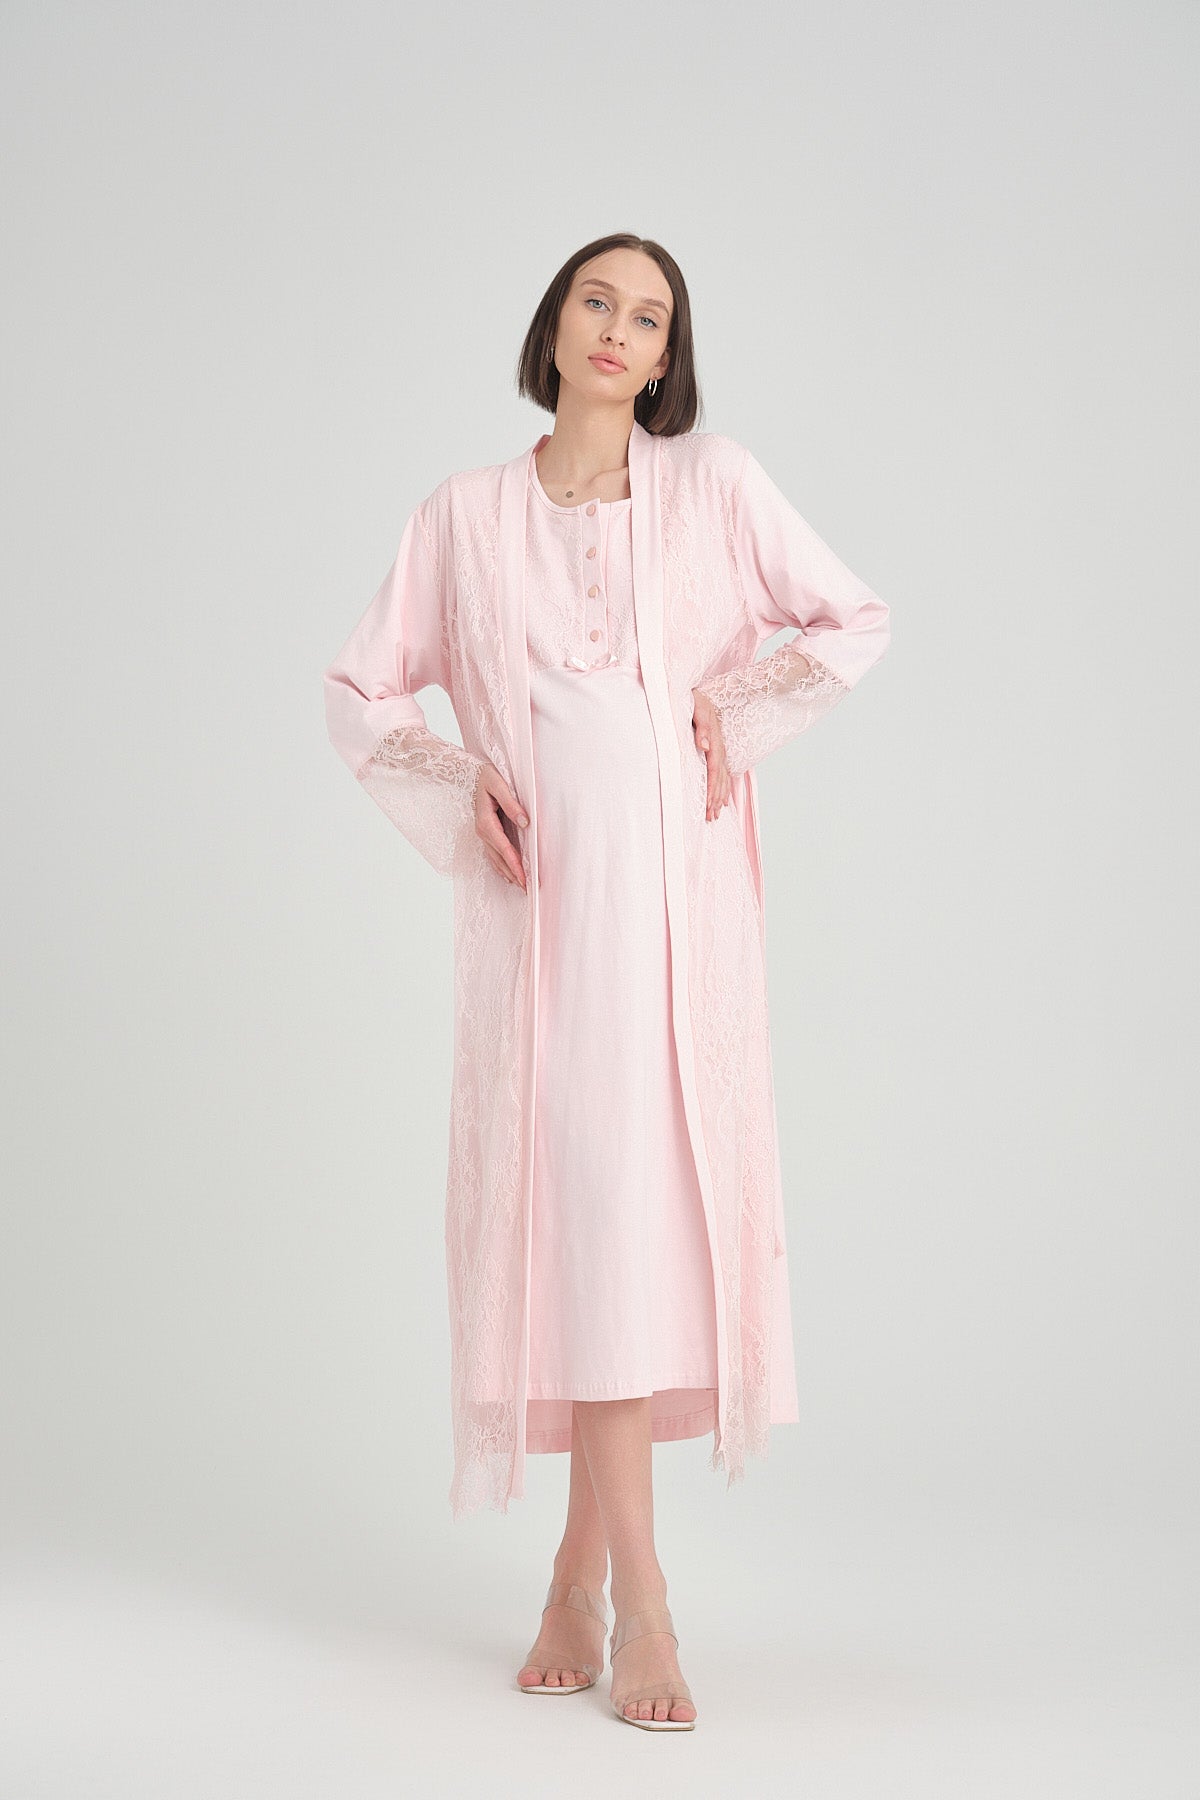 Shopymommy 2397 Lace Detailed Maternity & Nursing Nightgown With Robe Pink